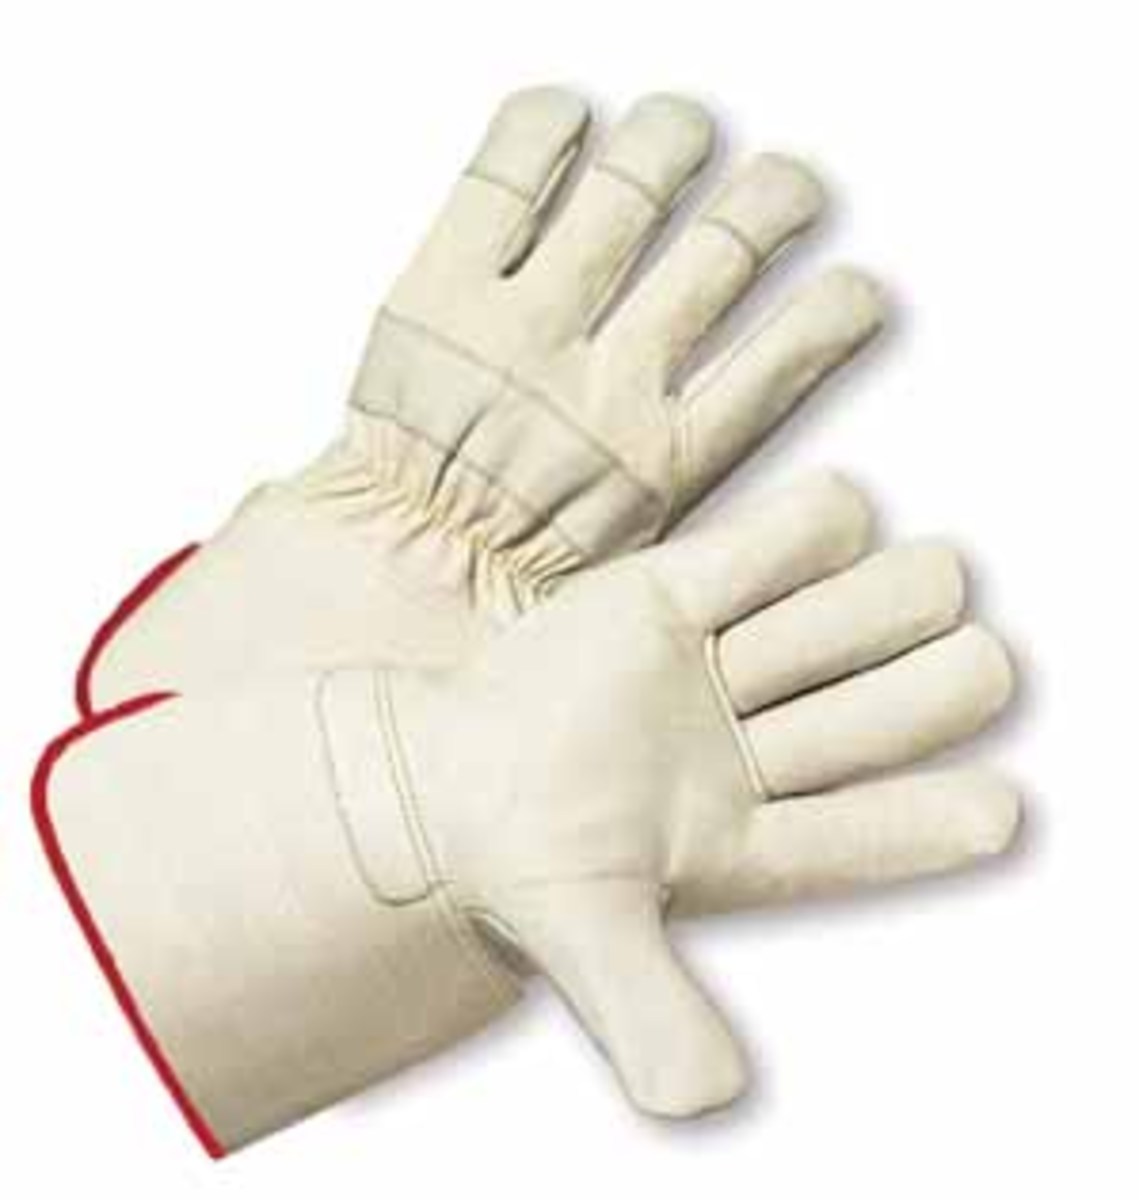 PIP® Medium Select Split Leather Palm Gloves With Canvas Back And Rubberized Gauntlet Cuff